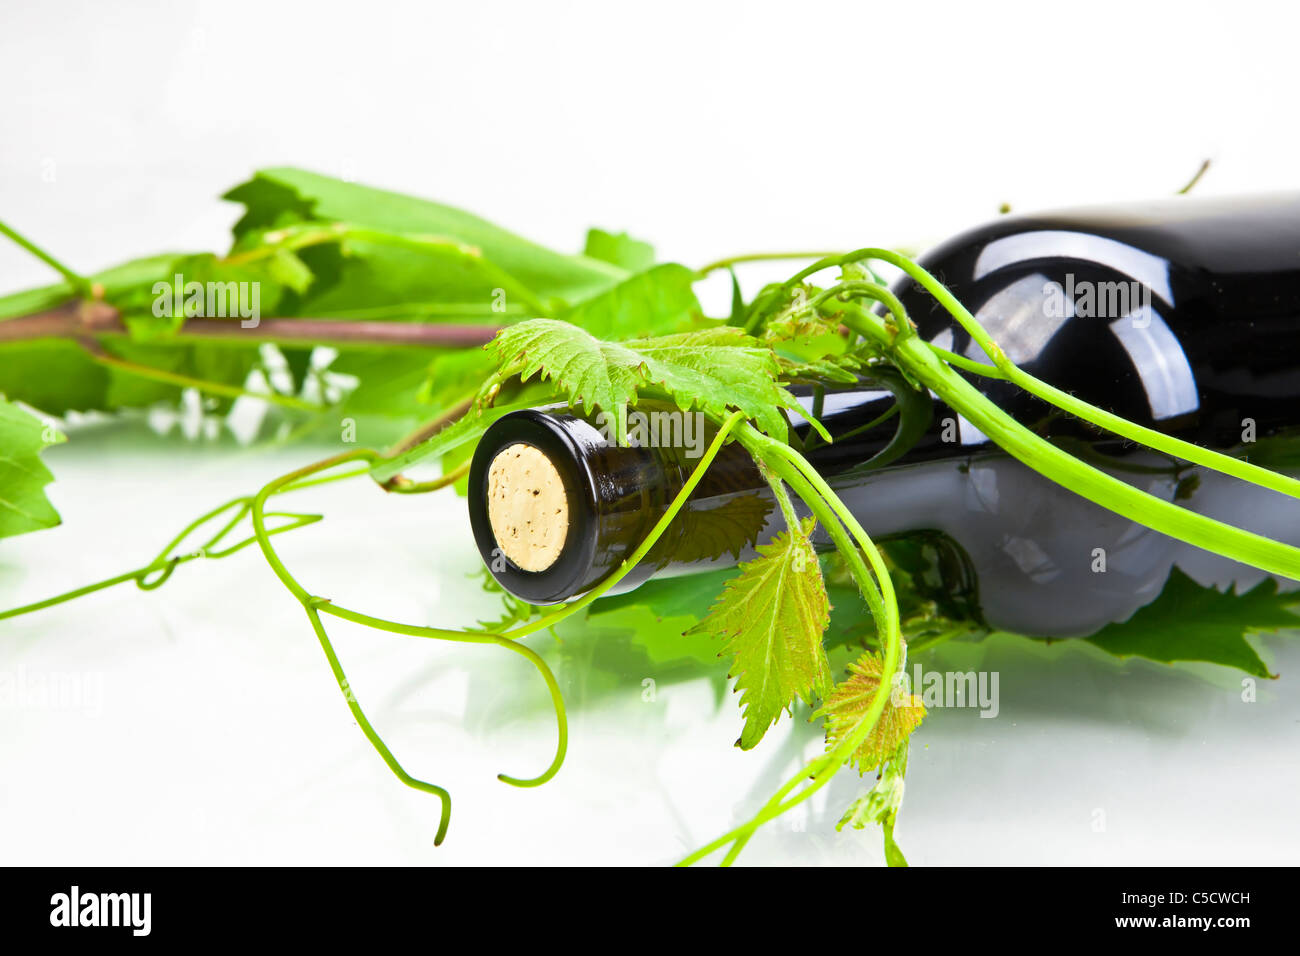 A bottle of red wine with leaves and tendrils Stock Photo